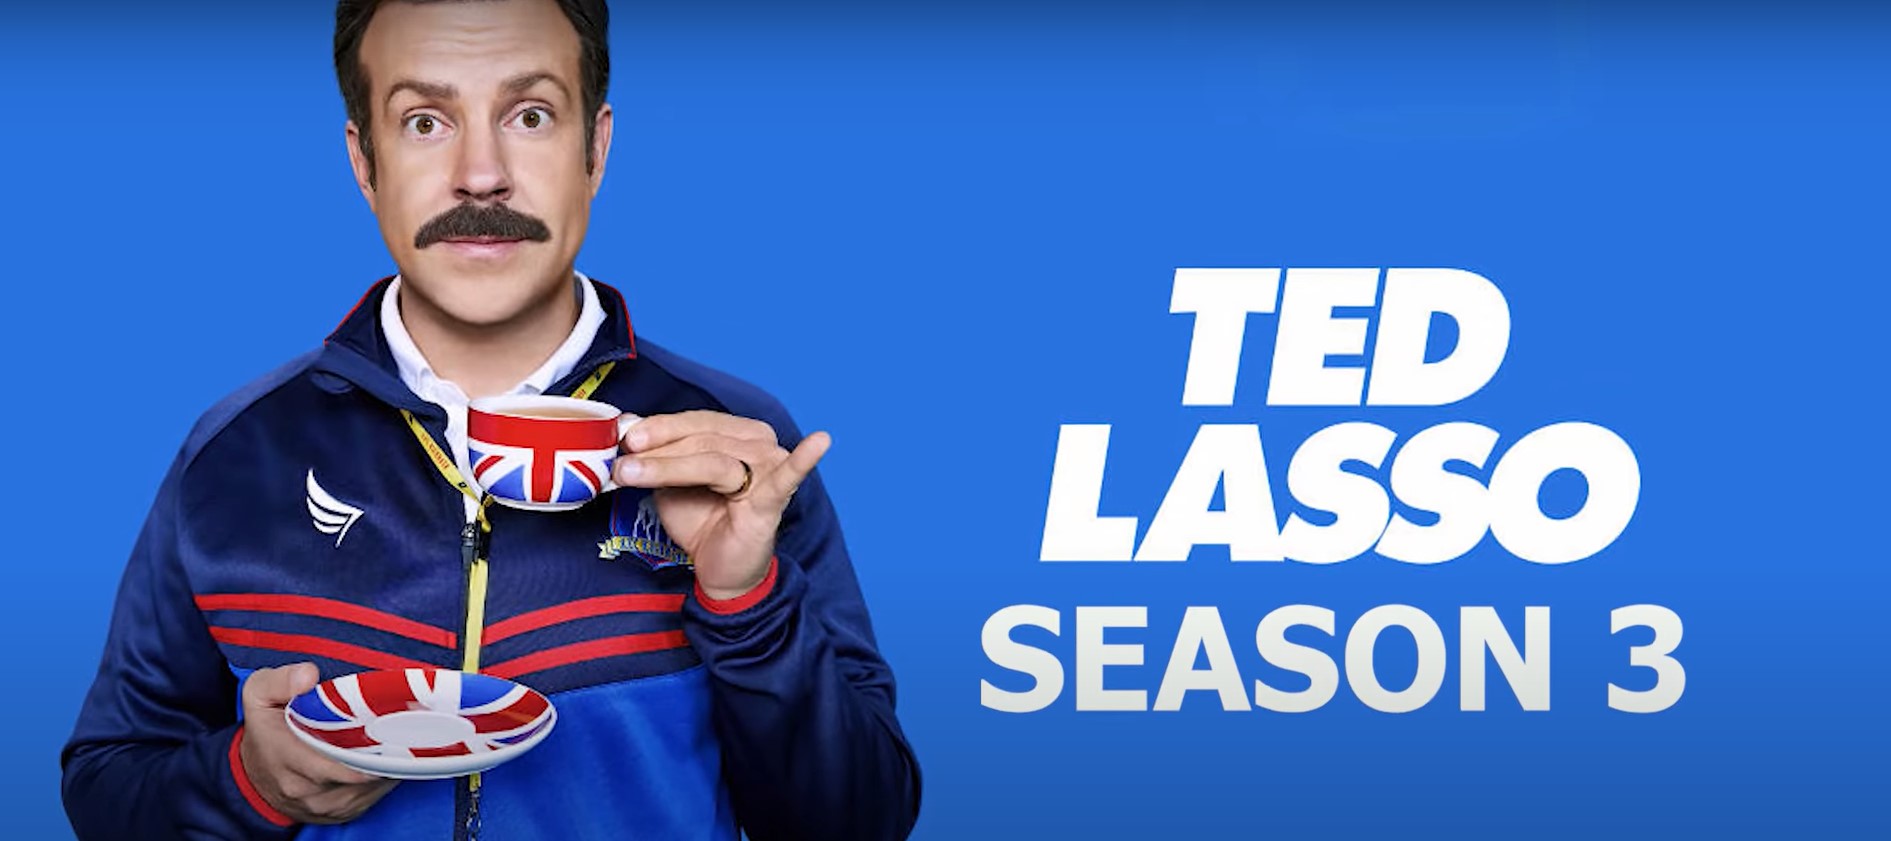 Ted Lasso Season 3: (2023) Release Date, Premiere, Cast, Storyline, and Episode